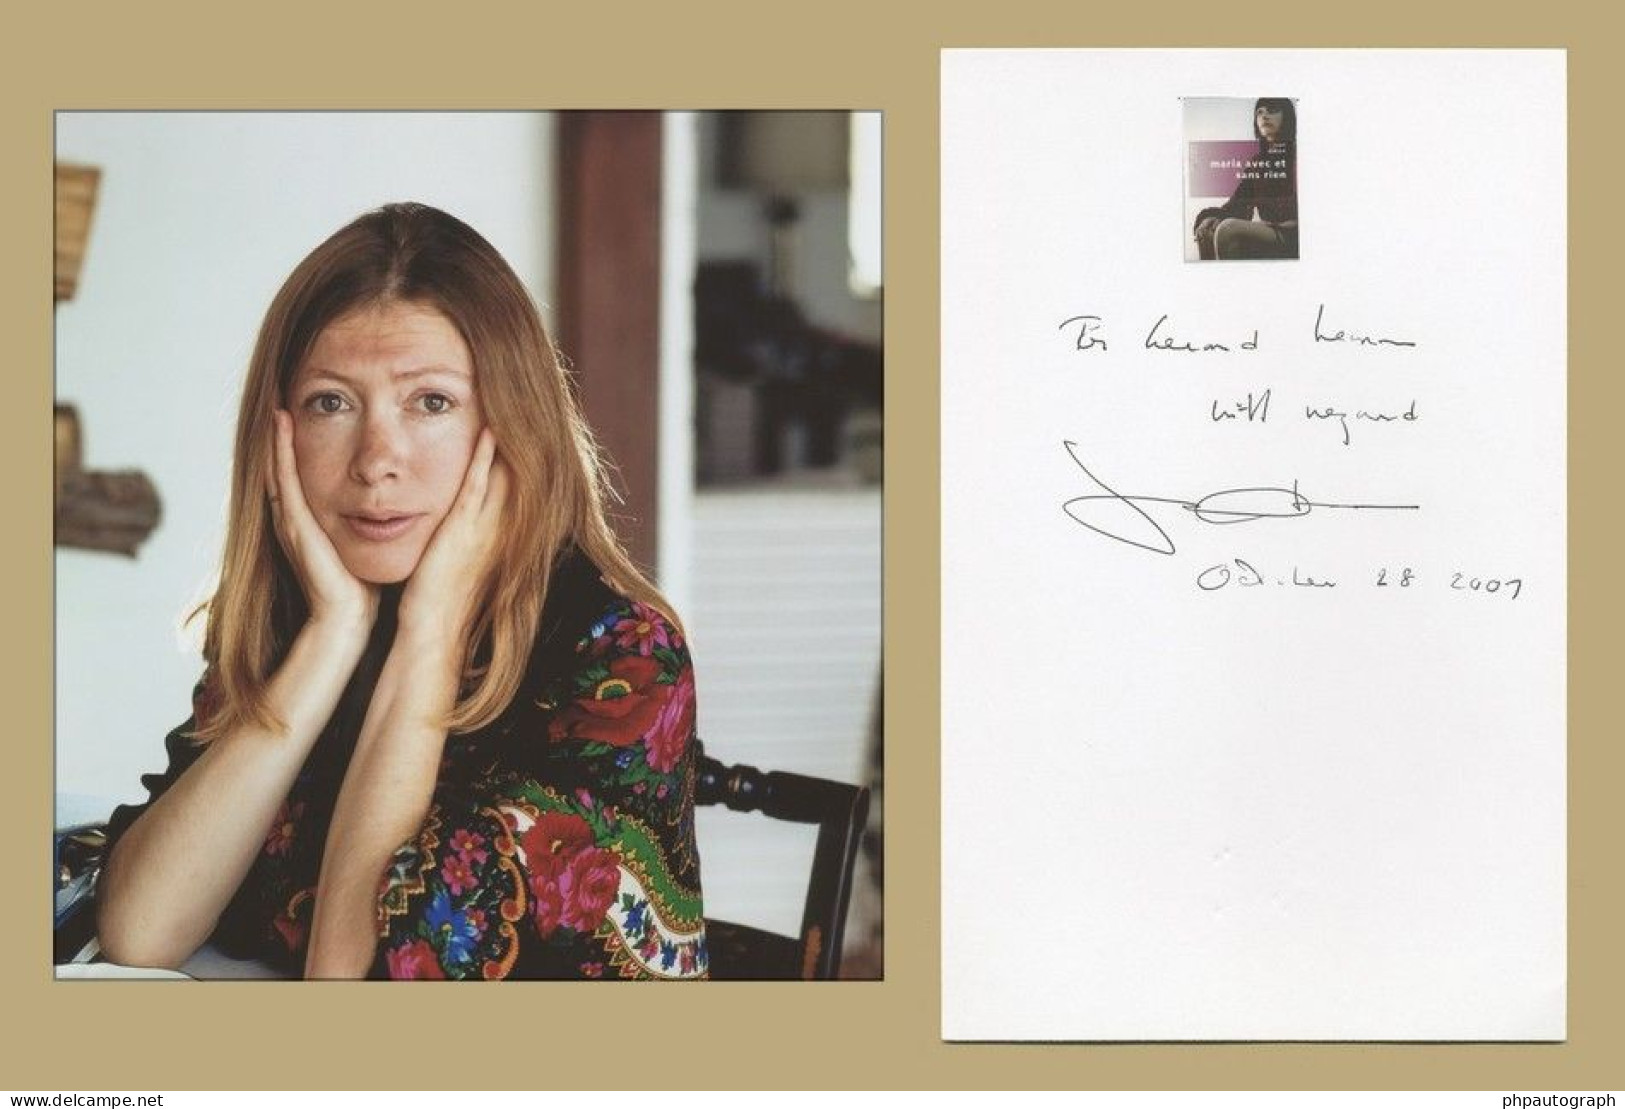 Joan Didion (1934-2021) - American Writer - Rare Signed Card + Photo - NY 2007 - Writers